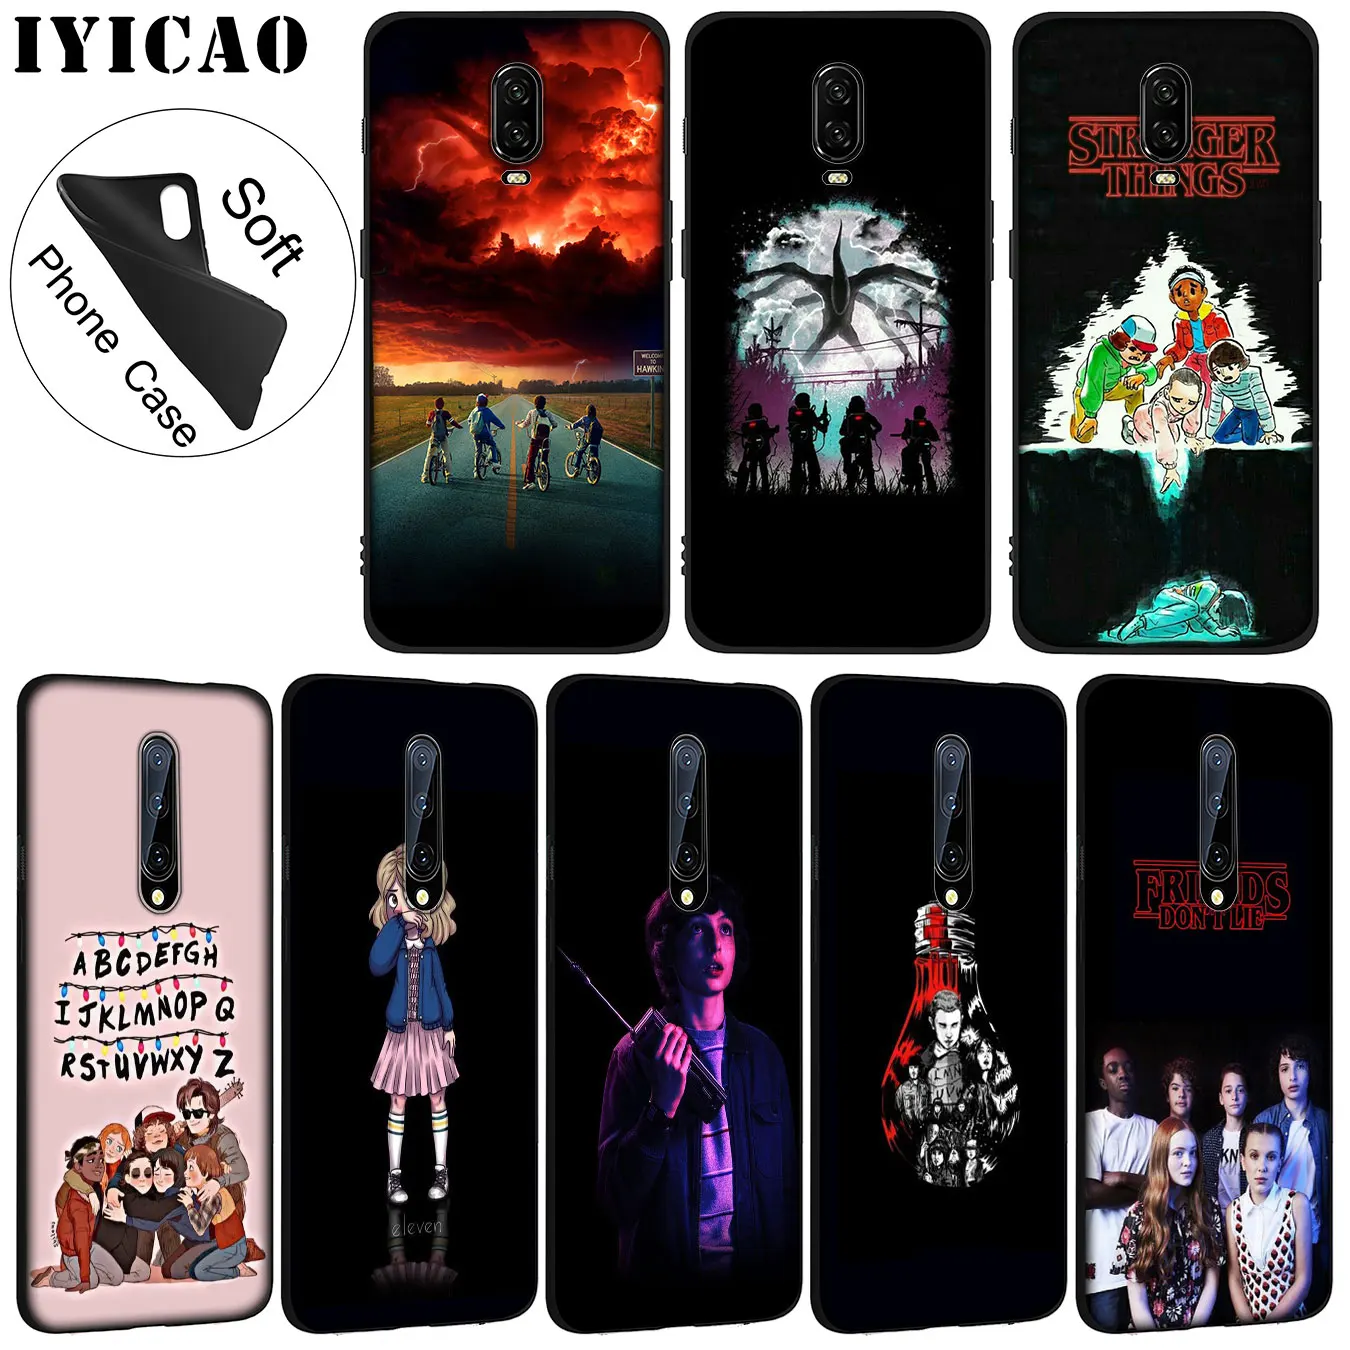 IYICAO Stranger Things tv Soft Silicone Phone Case for Oneplus 7T 7 Pro 6 6T 5 5T TPU Black Cover One Plus |